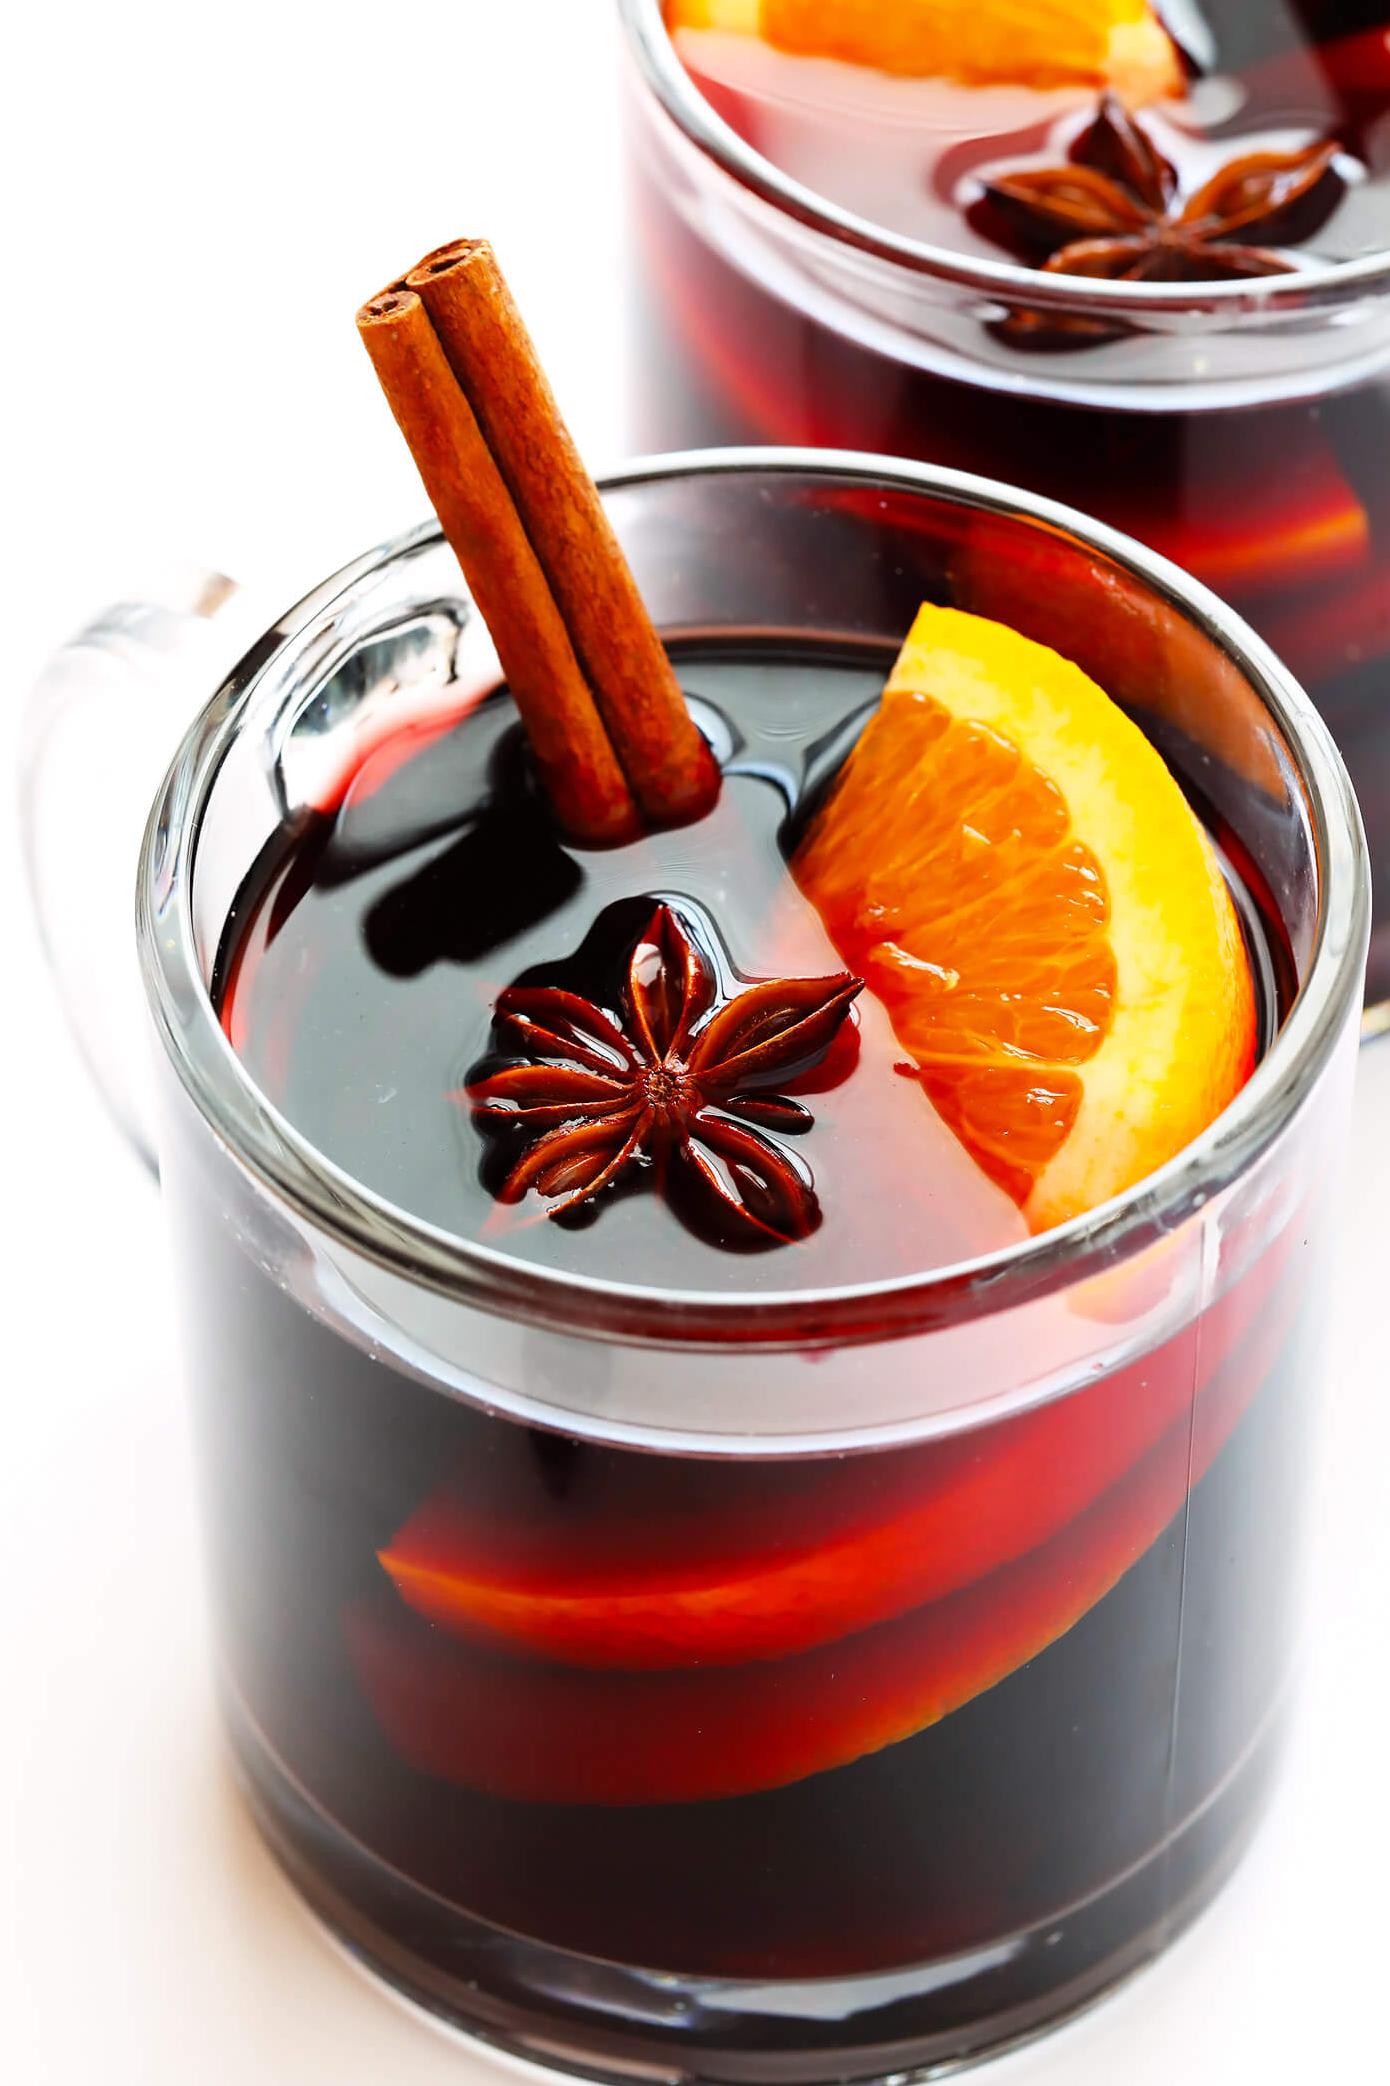  Aromatic spices, sweet red wine, and citrus come together in this decadent spiced wine recipe.